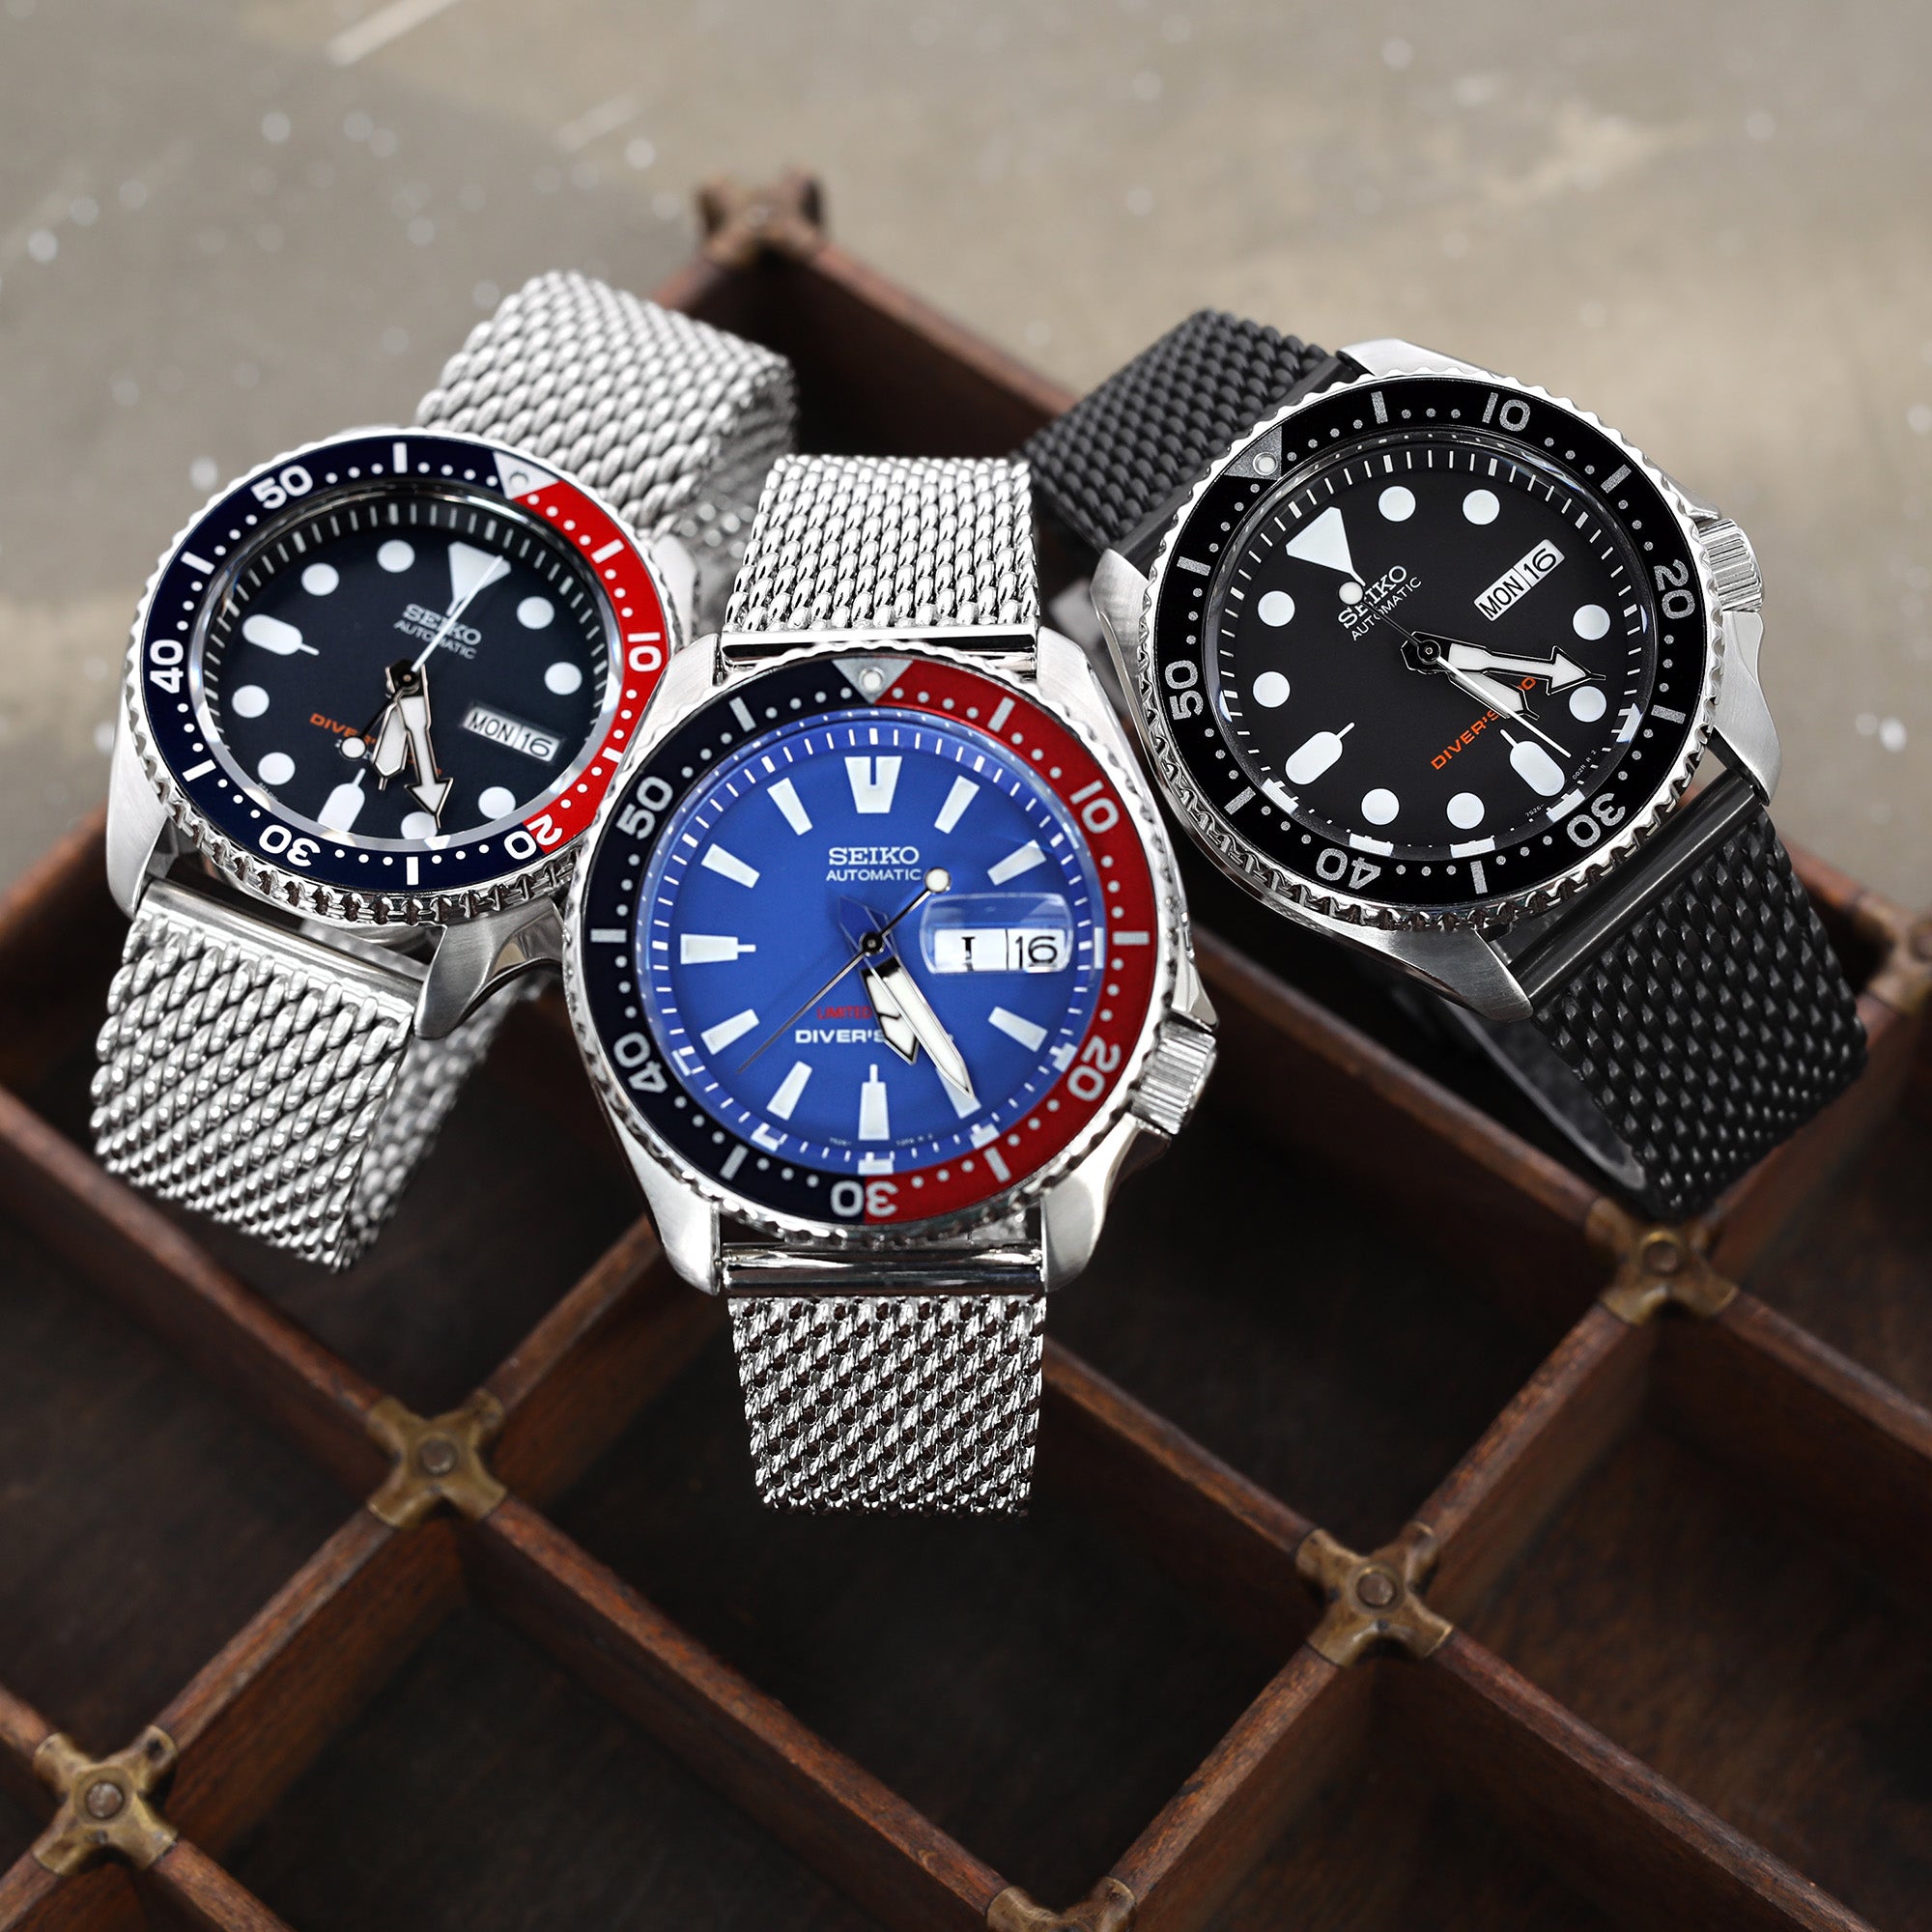 Best Fitted Mesh Band For Your SKX! (Look alike Seiko 5 Sports) | Strapcode